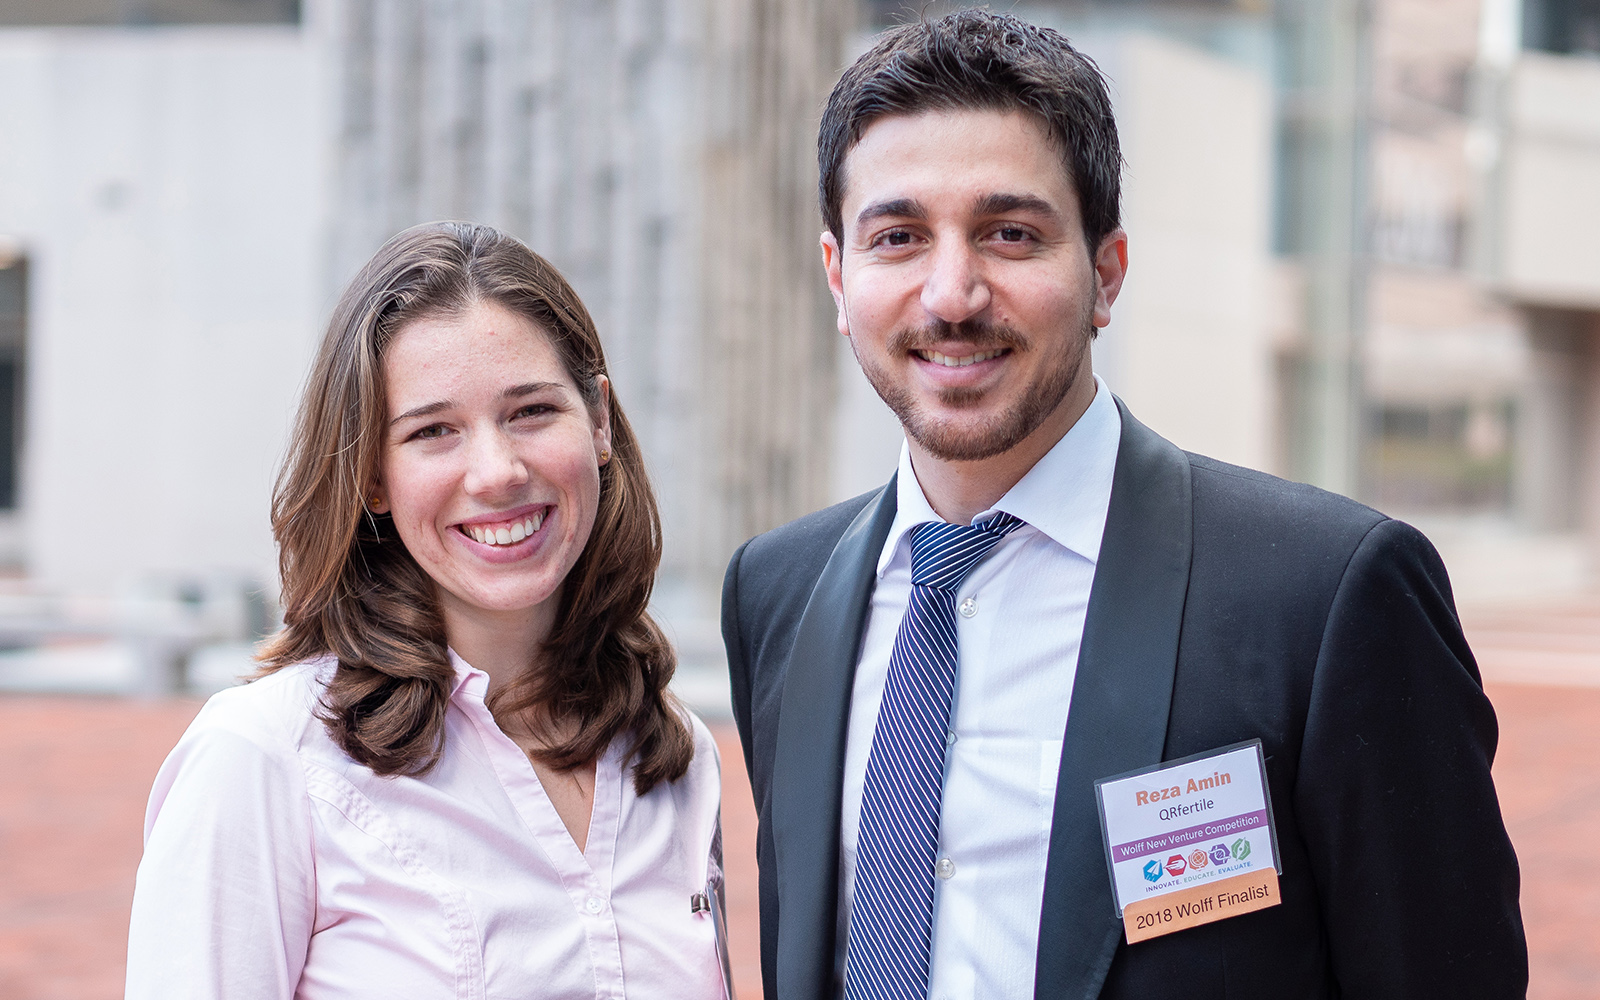 Stephanie Knowlton and Reza Amin, both doctoral students in biomedical engineering, won first prize in the 2018 Wolff New Venture Competition.